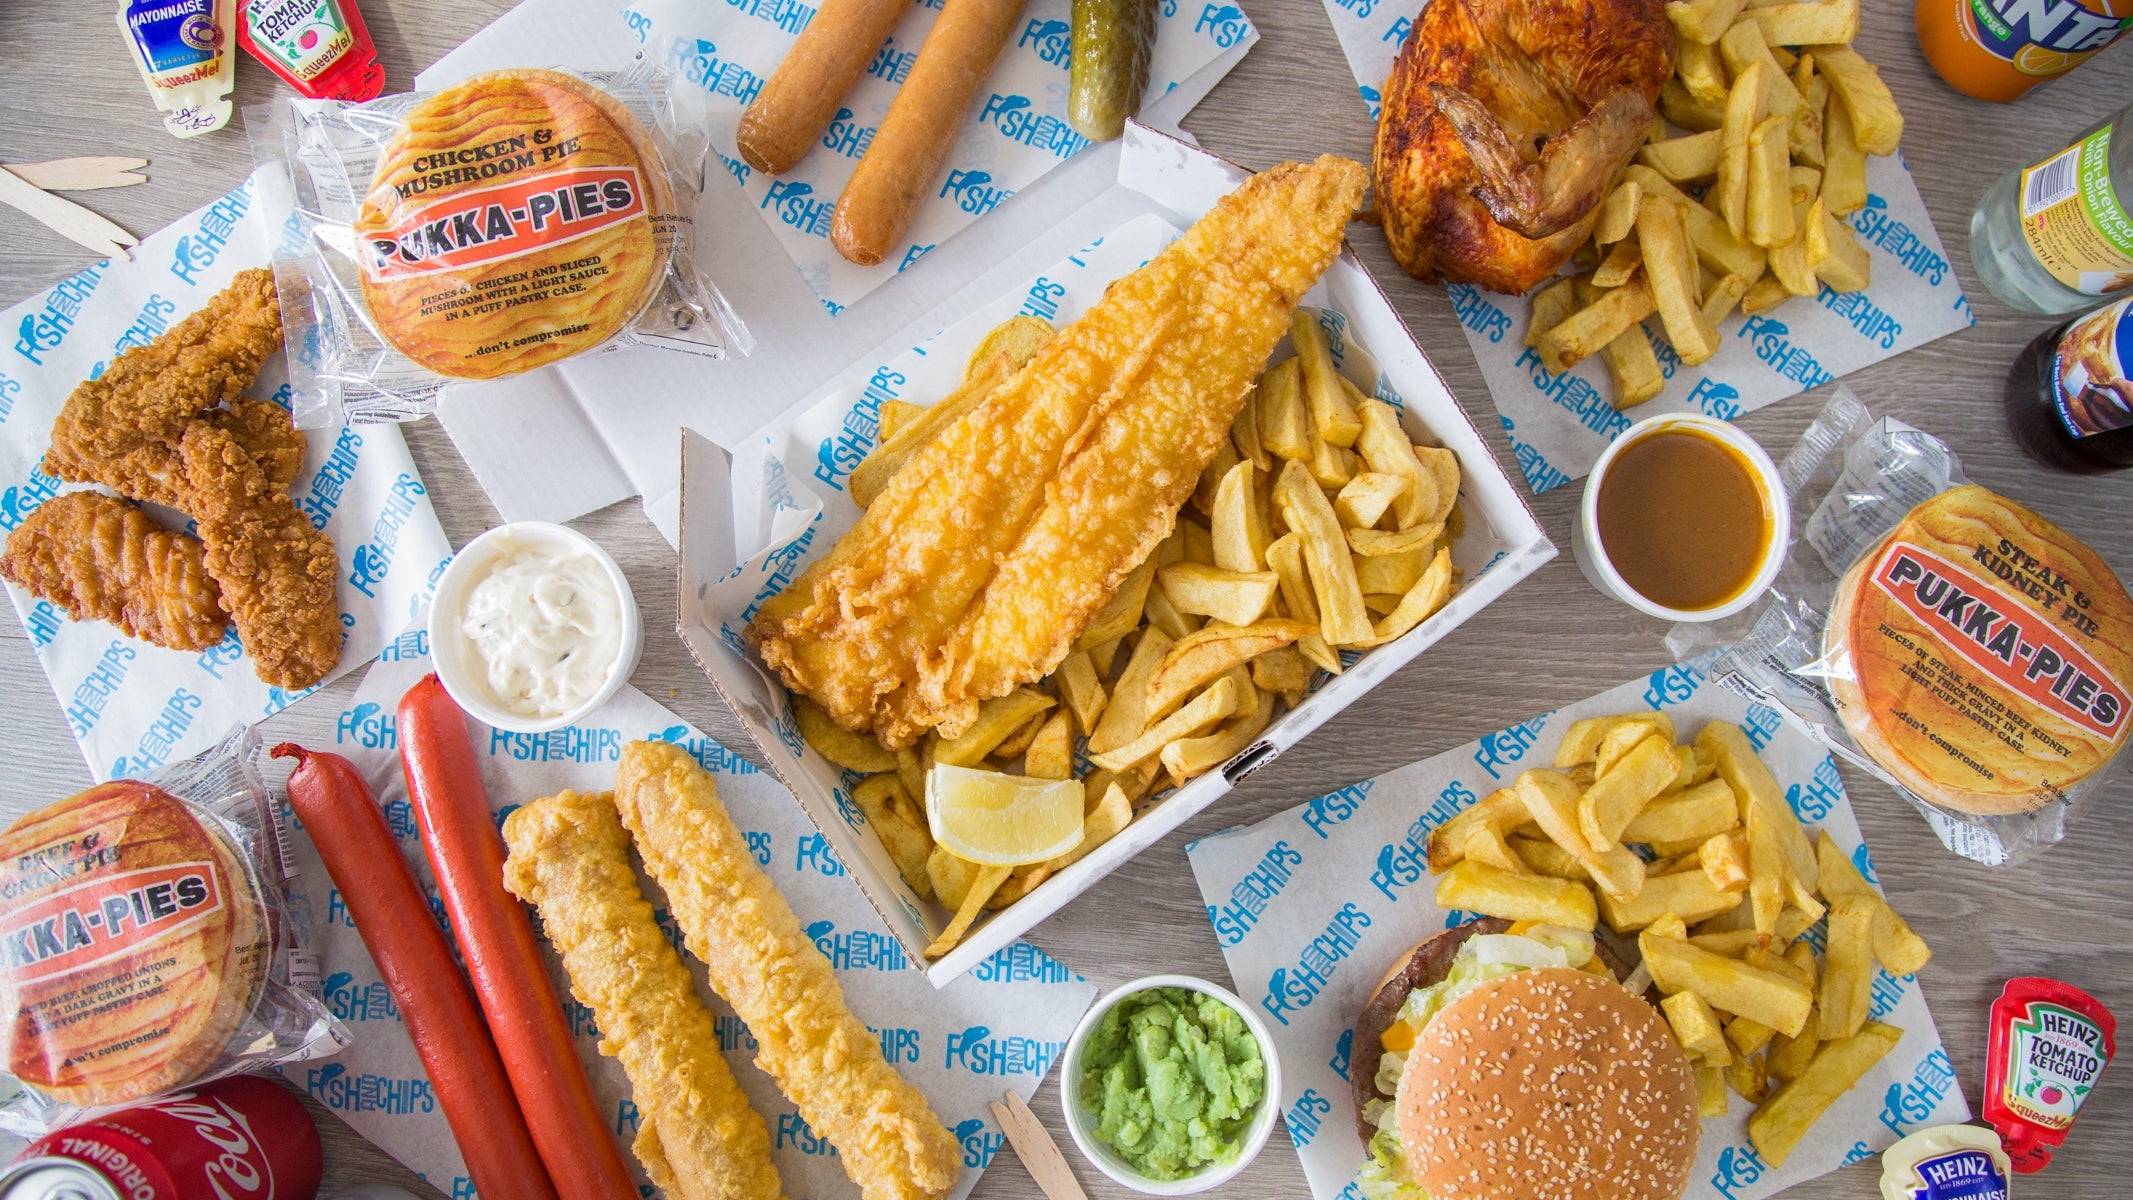 neptunes fish and chips england